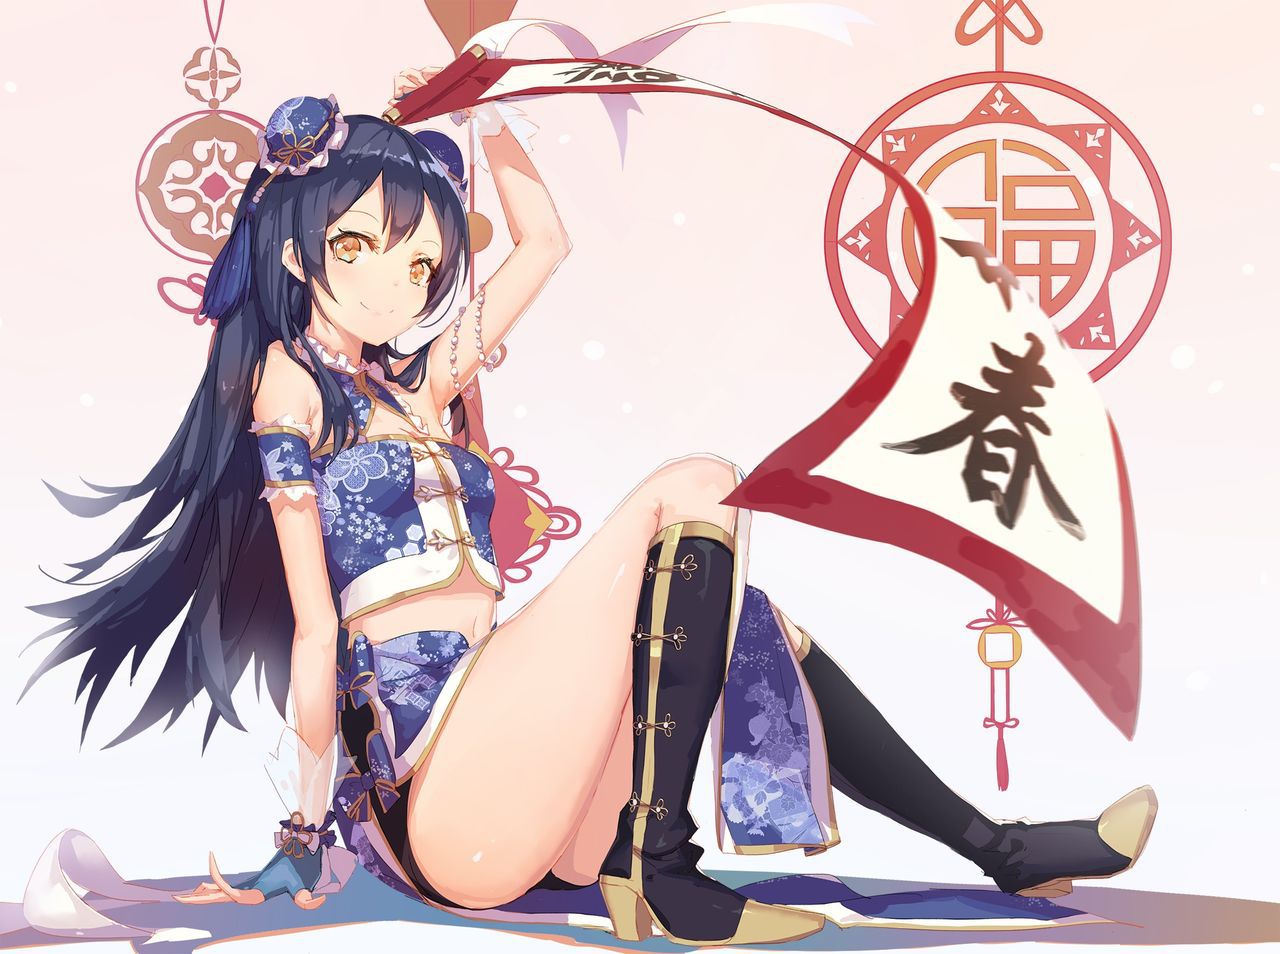 【There is an image】Sonoda Umi is a real ban www in dark customs (Love Live!) ) 23